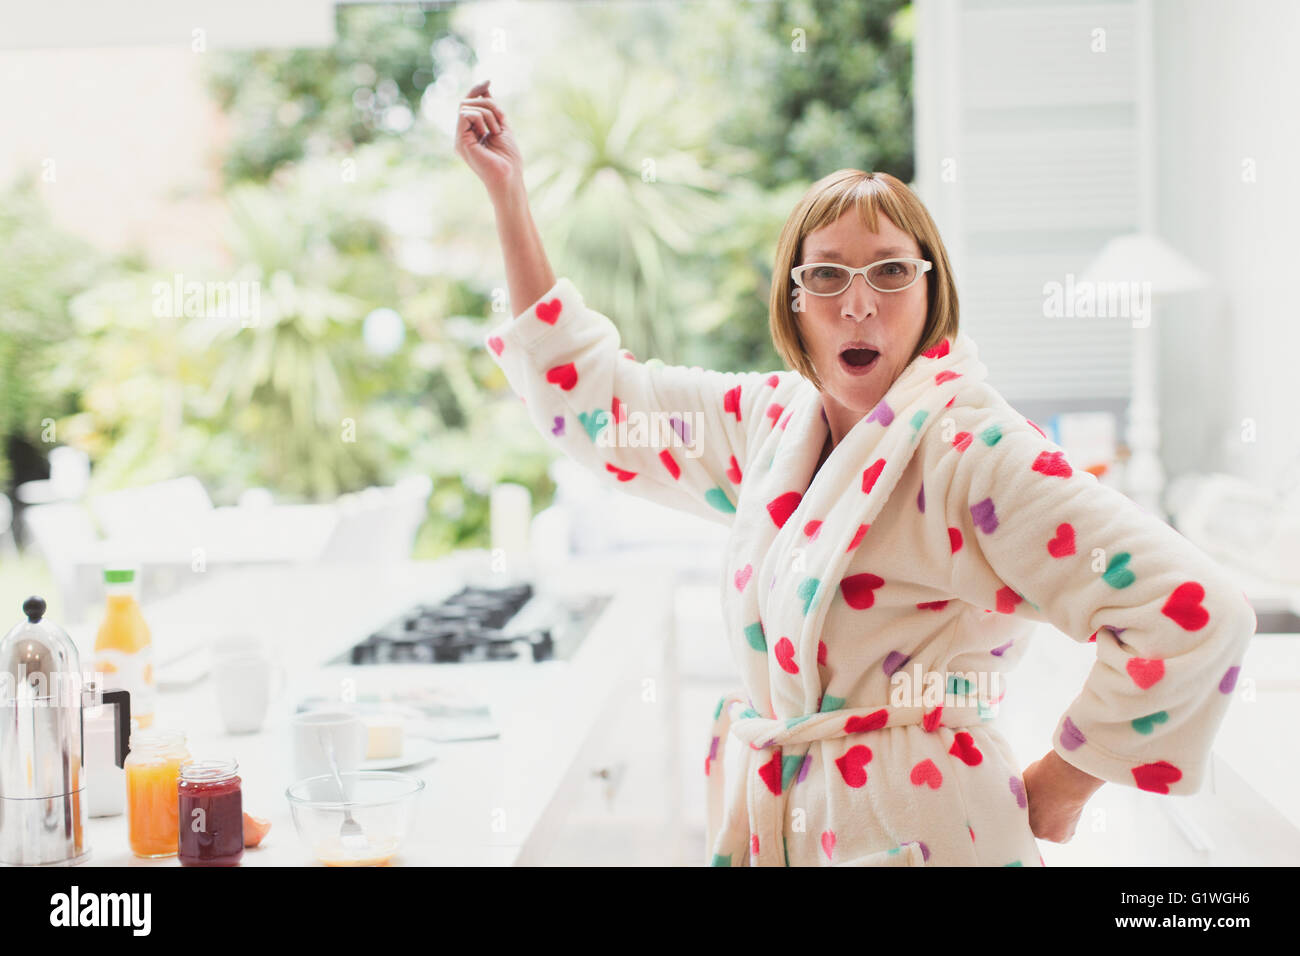 Portrait of playful mature woman in bathrobe dancing in kitchen Stock Photo